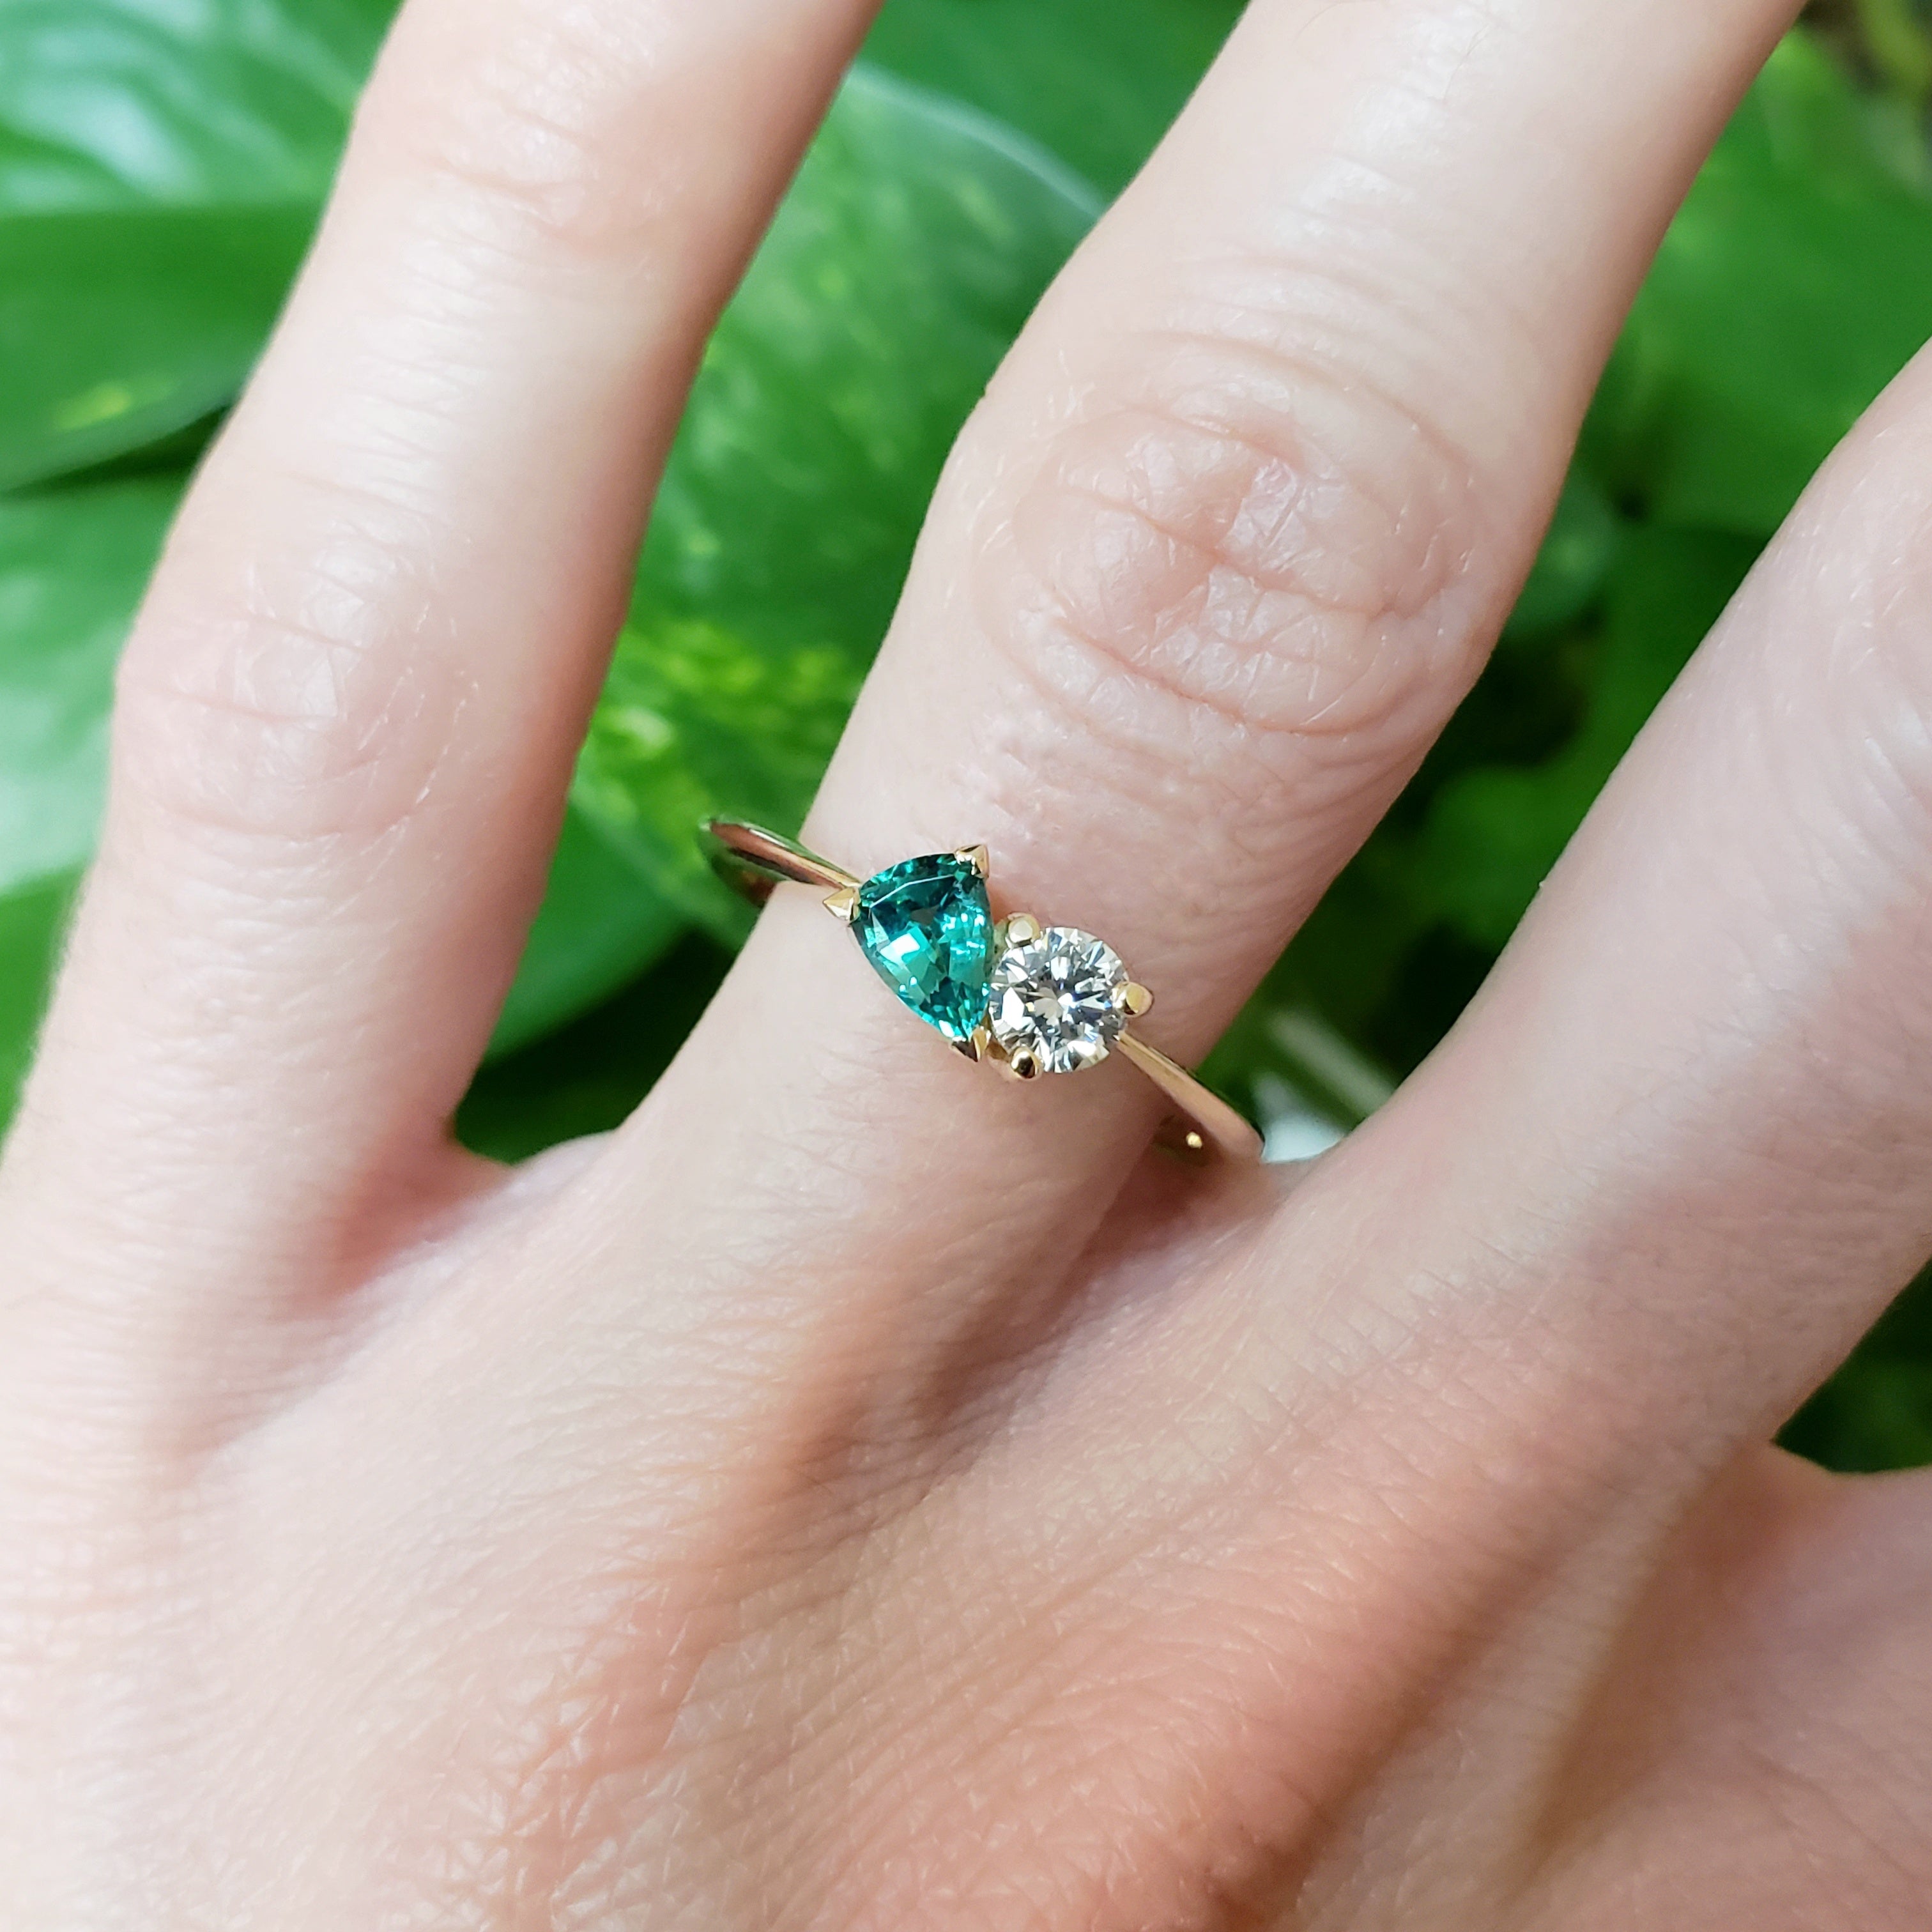 Emerald and Canadian Diamond Engagement Ring | Era Design Vancouver Canada